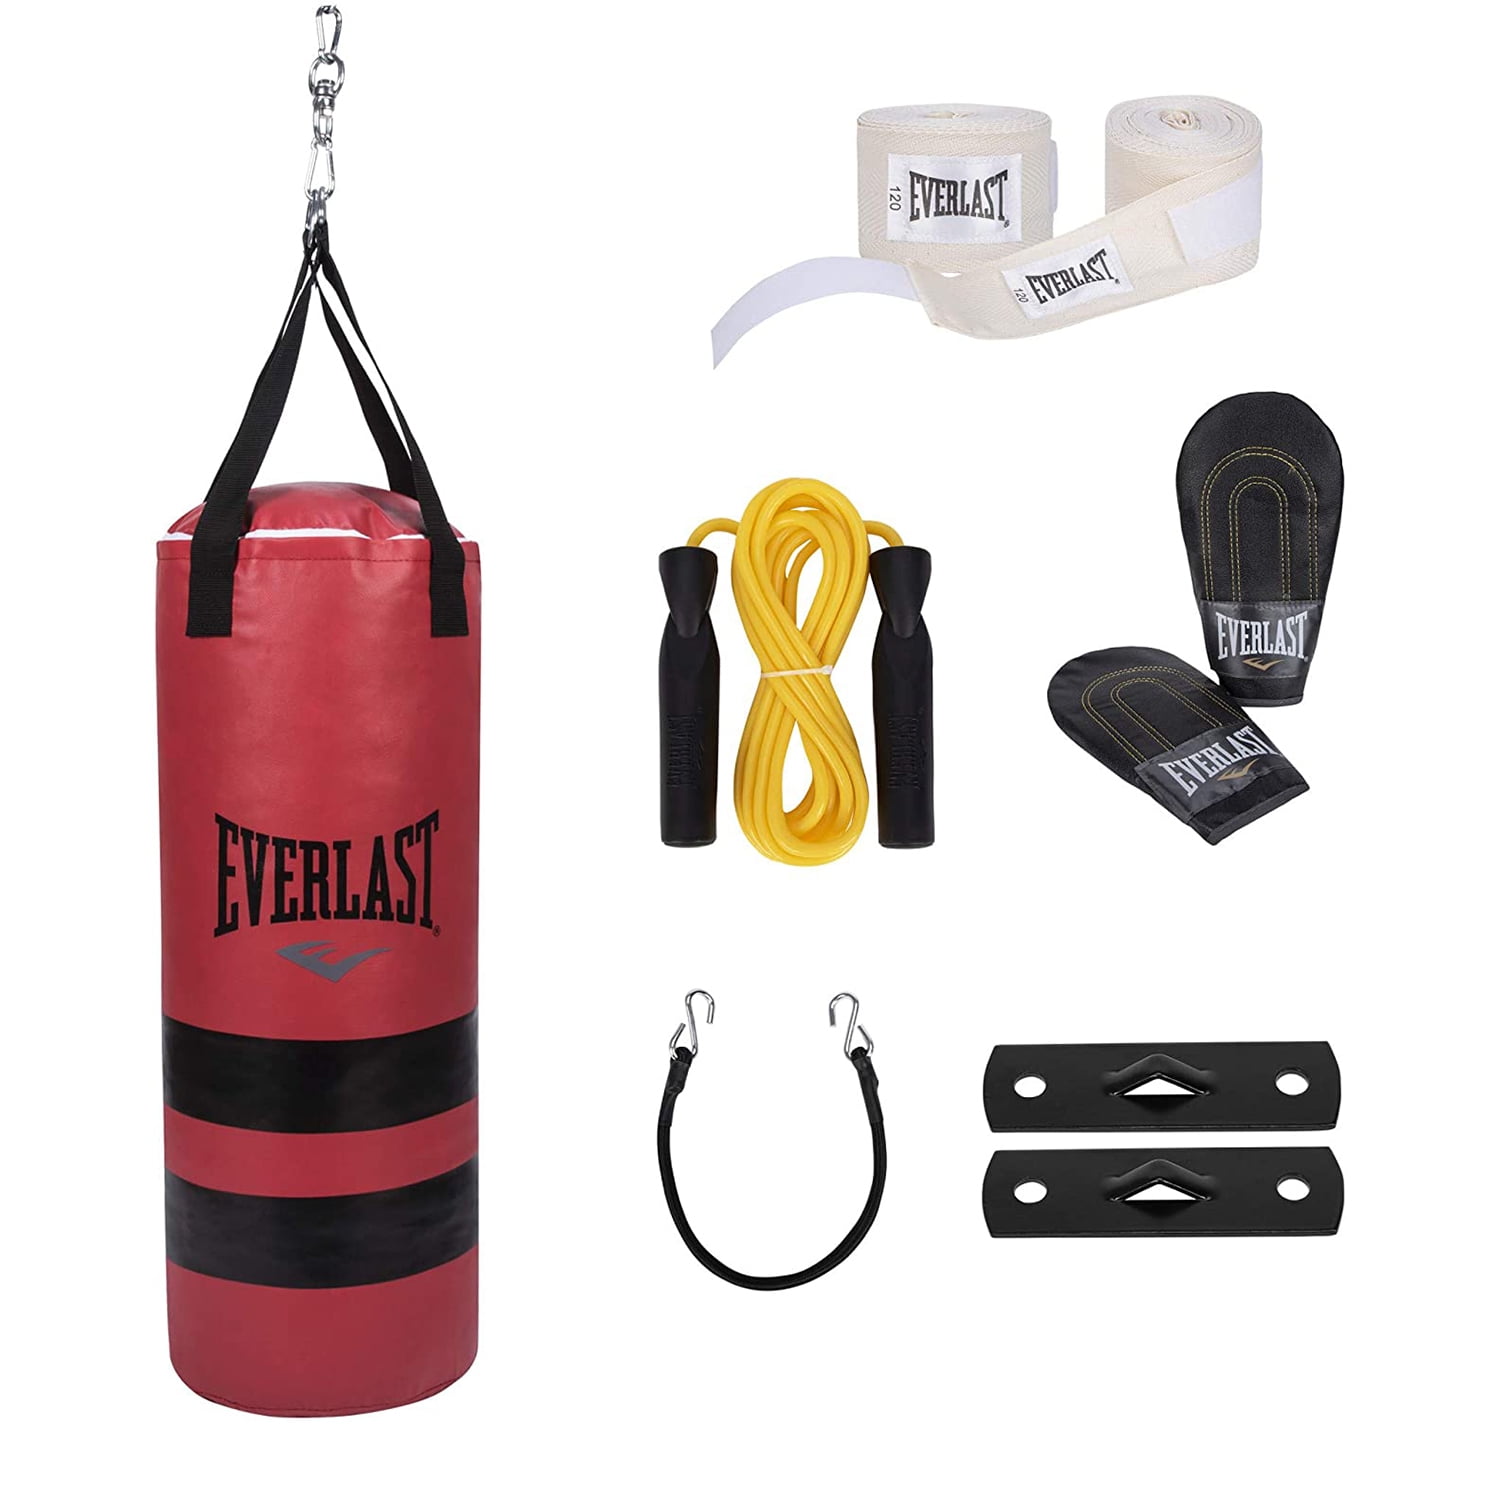 Mixed Martial Fitness for & Training with Heavy Bag - Walmart.com